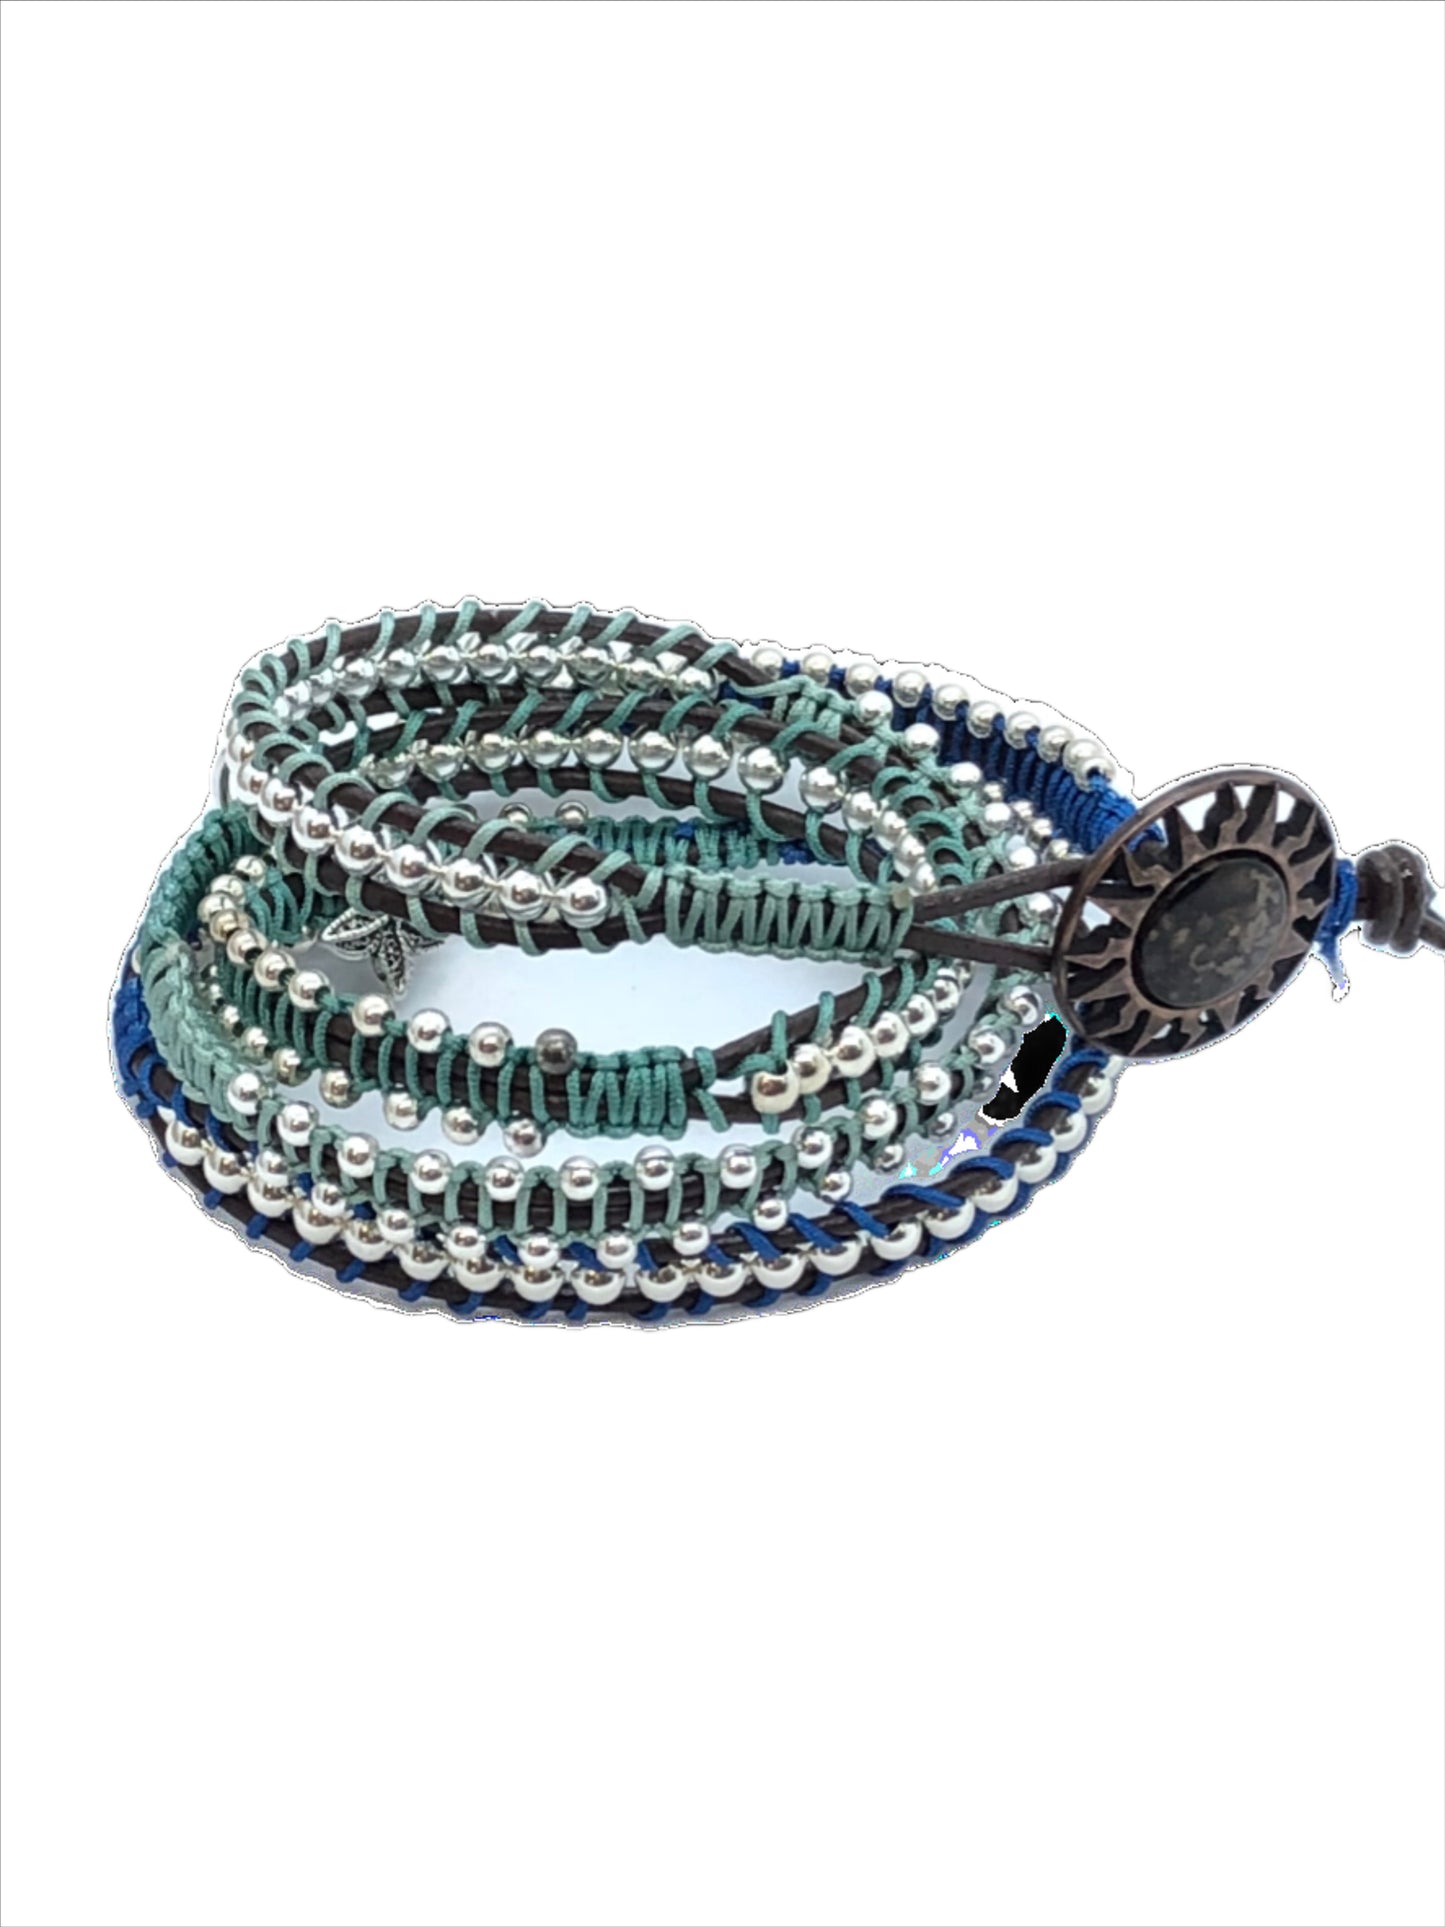 silver and leather wrap bracelet with a copper button bead. the leather is brown and the cord is green and royal blue